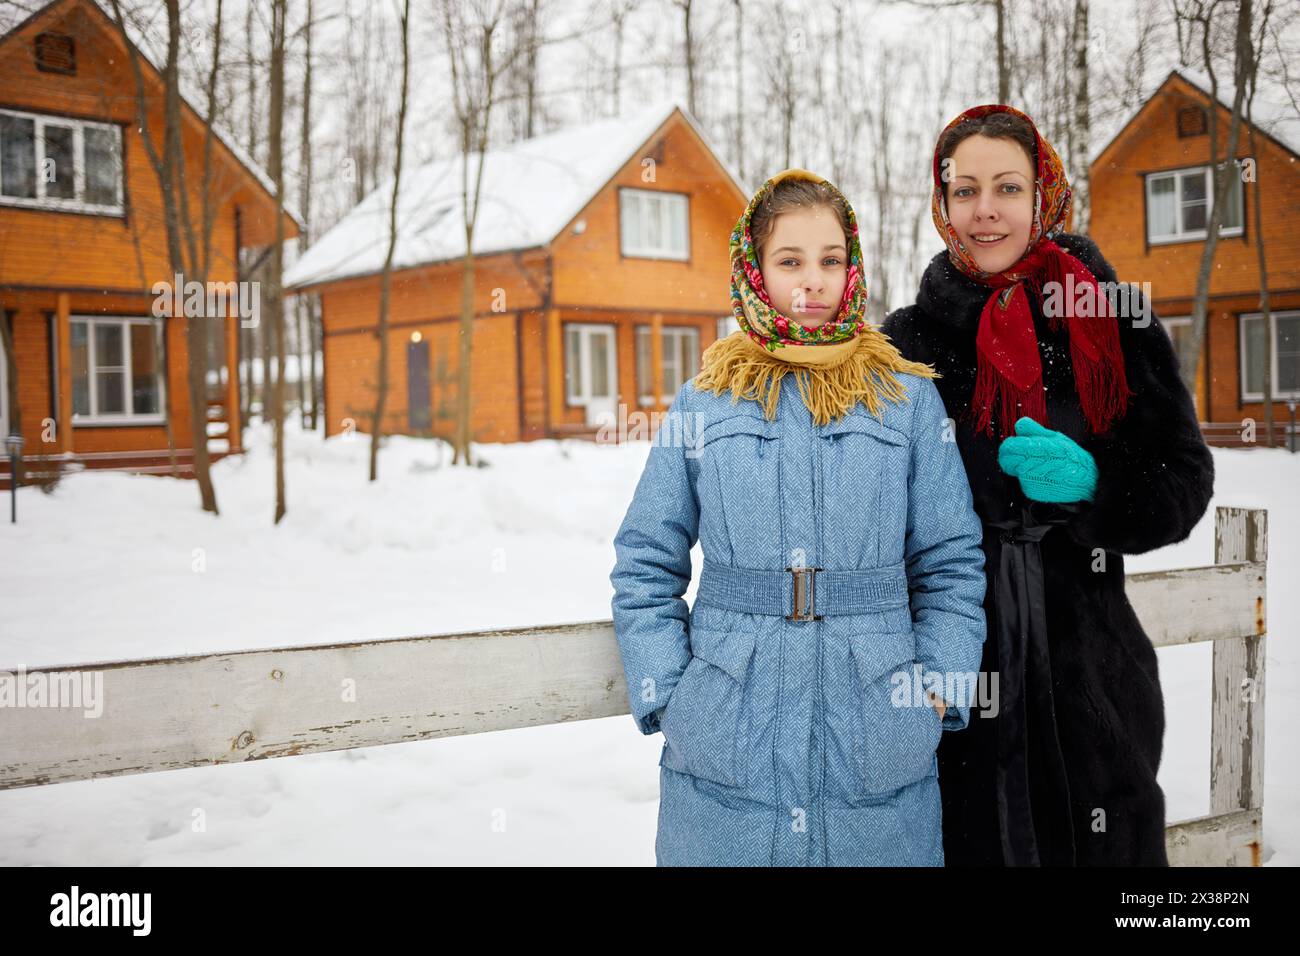 Smiling woman and teenage girl in folk style shawls stand near fencing against wooden houses on winter day. Stock Photo